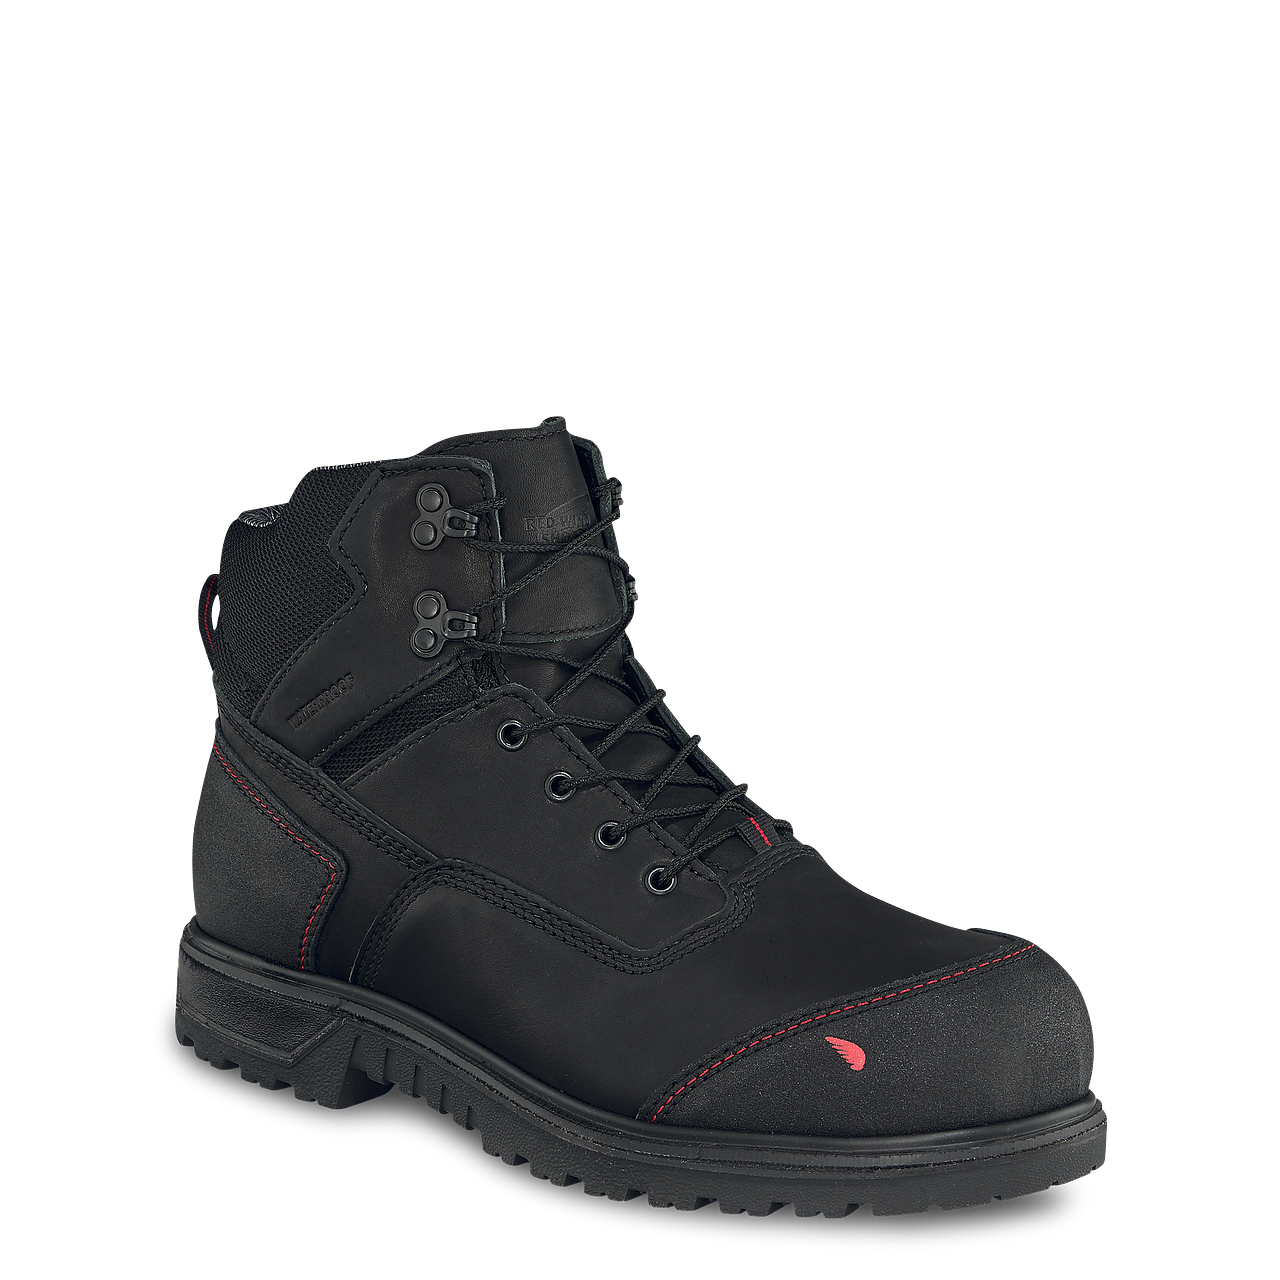 Red Wing 2400 BRNR XP 6-Inch Waterproof Safety Toe Boot